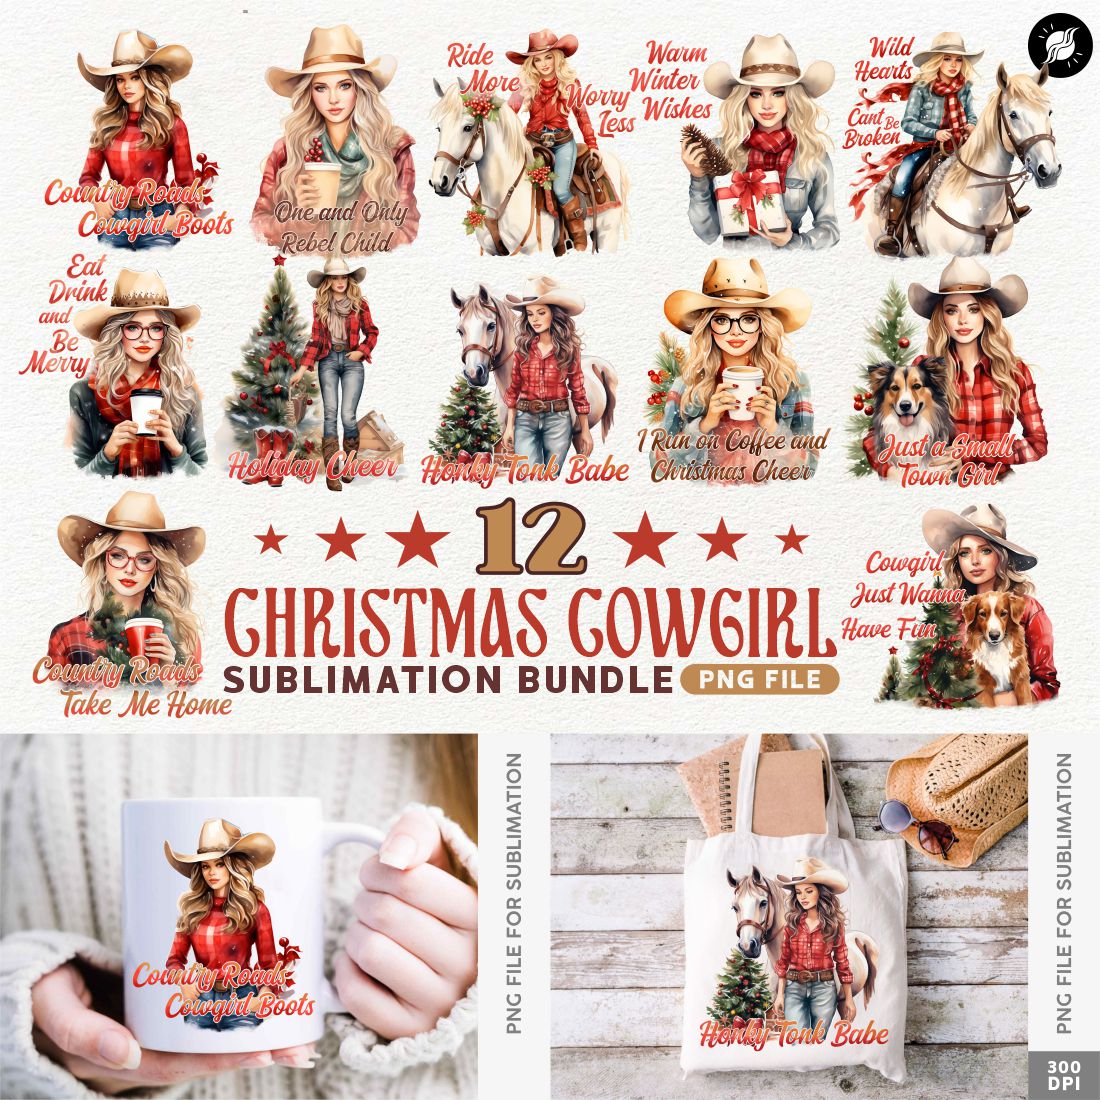 Christmas Cowgirl Sublimation Designs PNG Bundle cover image.